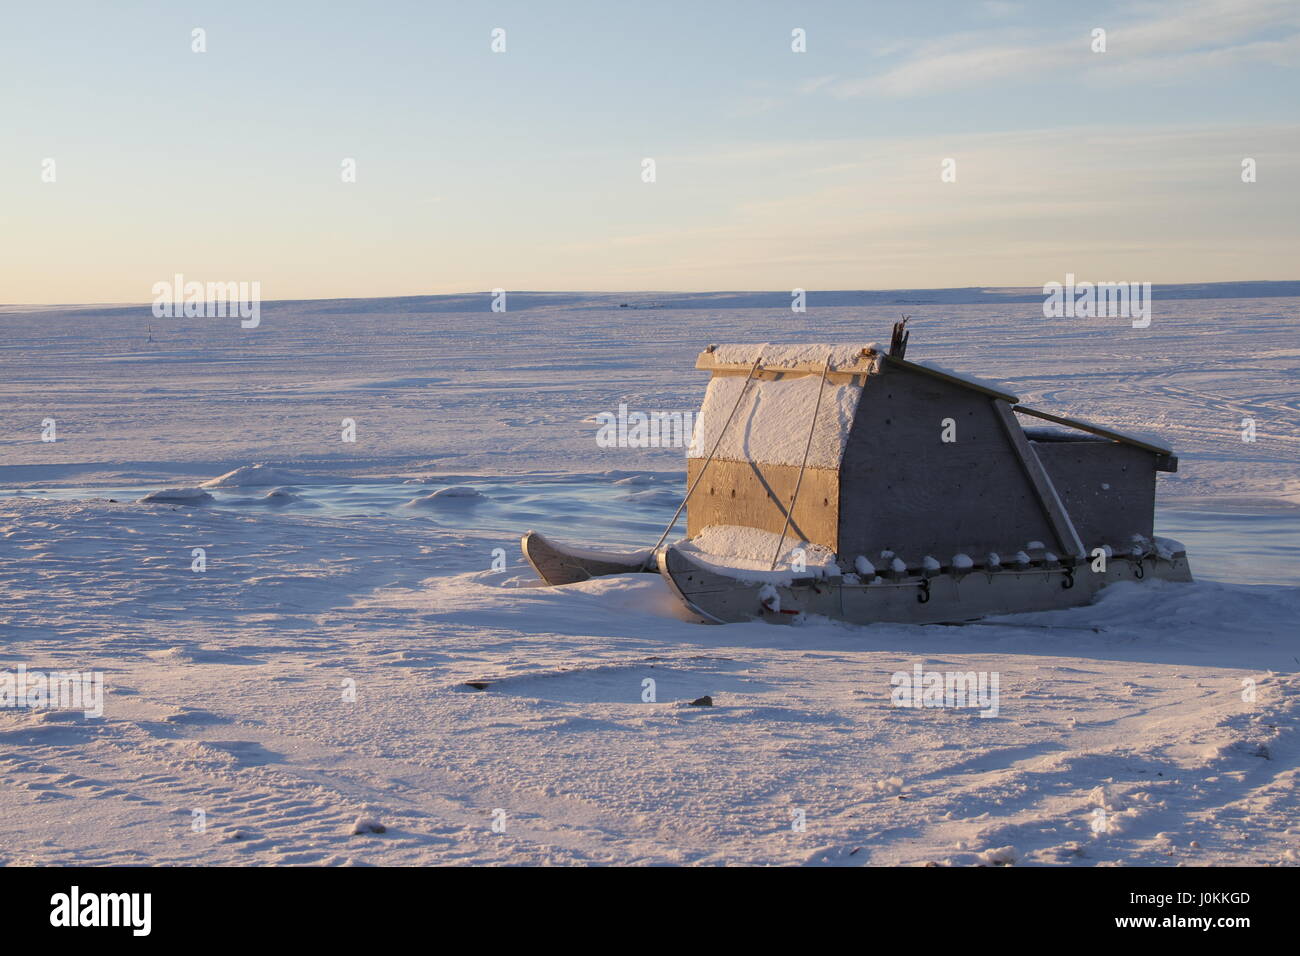 Komatiq or Inuit sled in the community of Cambridge Bay in the Canadian high arctic Stock Photo